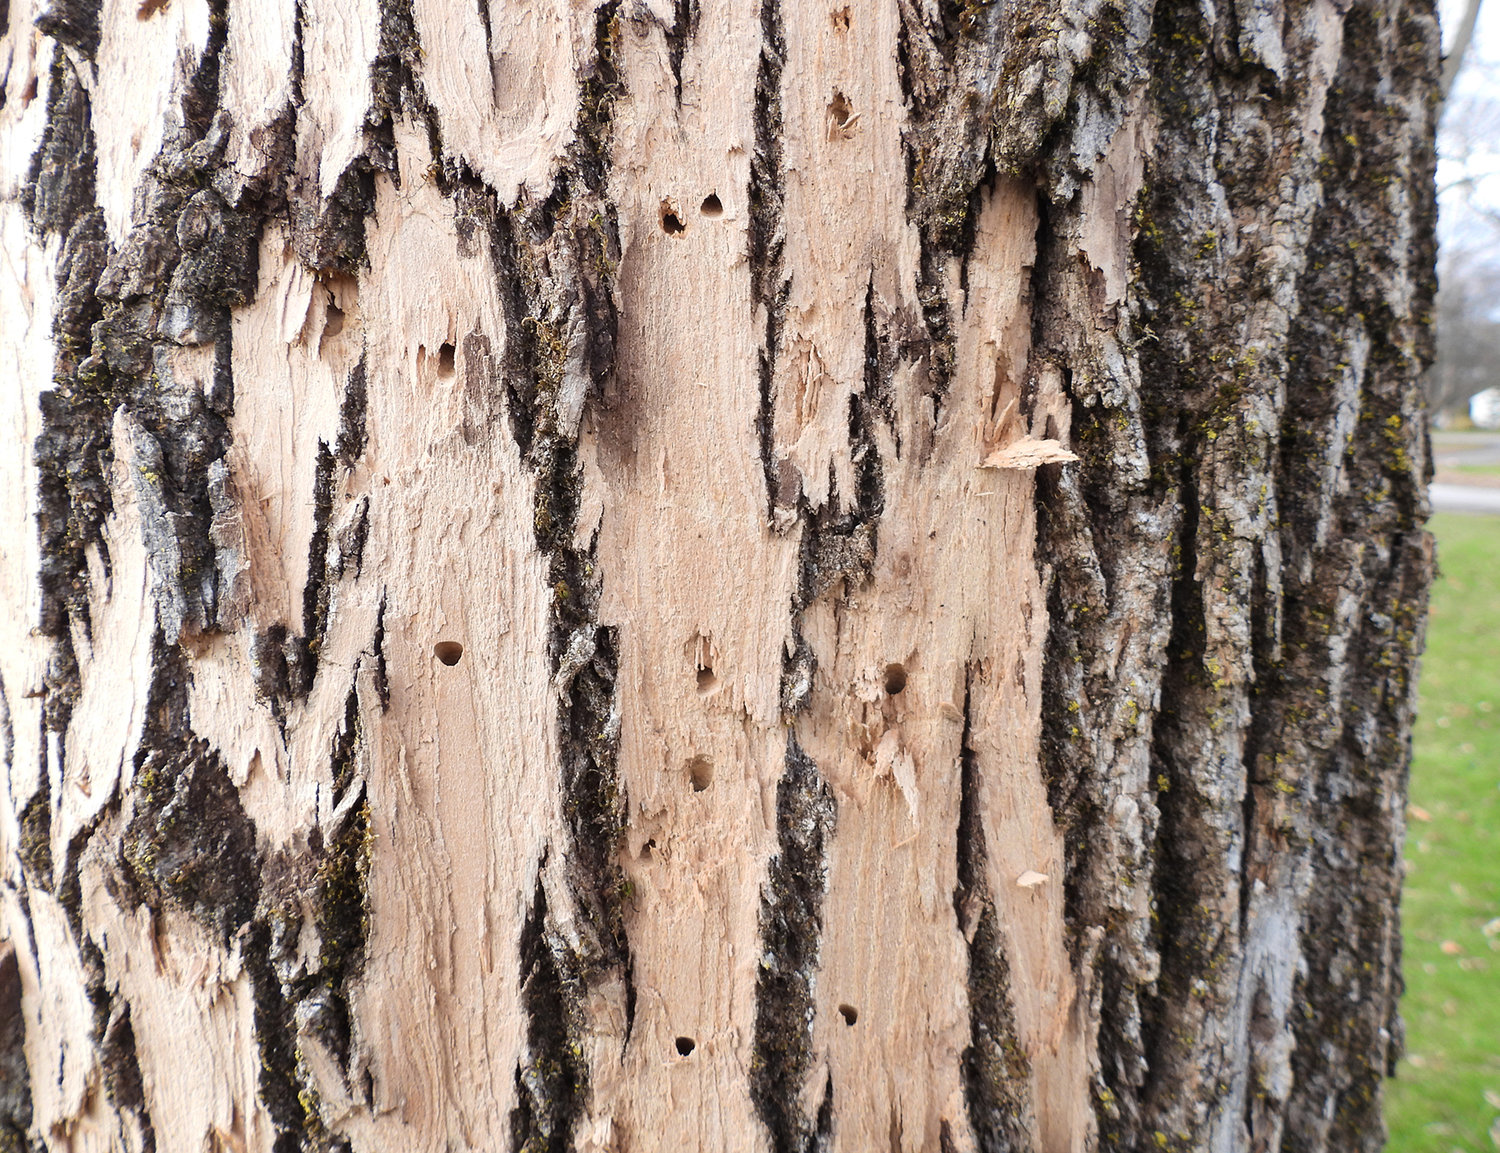 A CLEAR SIGN — Emerald ash borers leave a distinct D-shaped exit hole when the larva reaches maturity and leaves the tree.